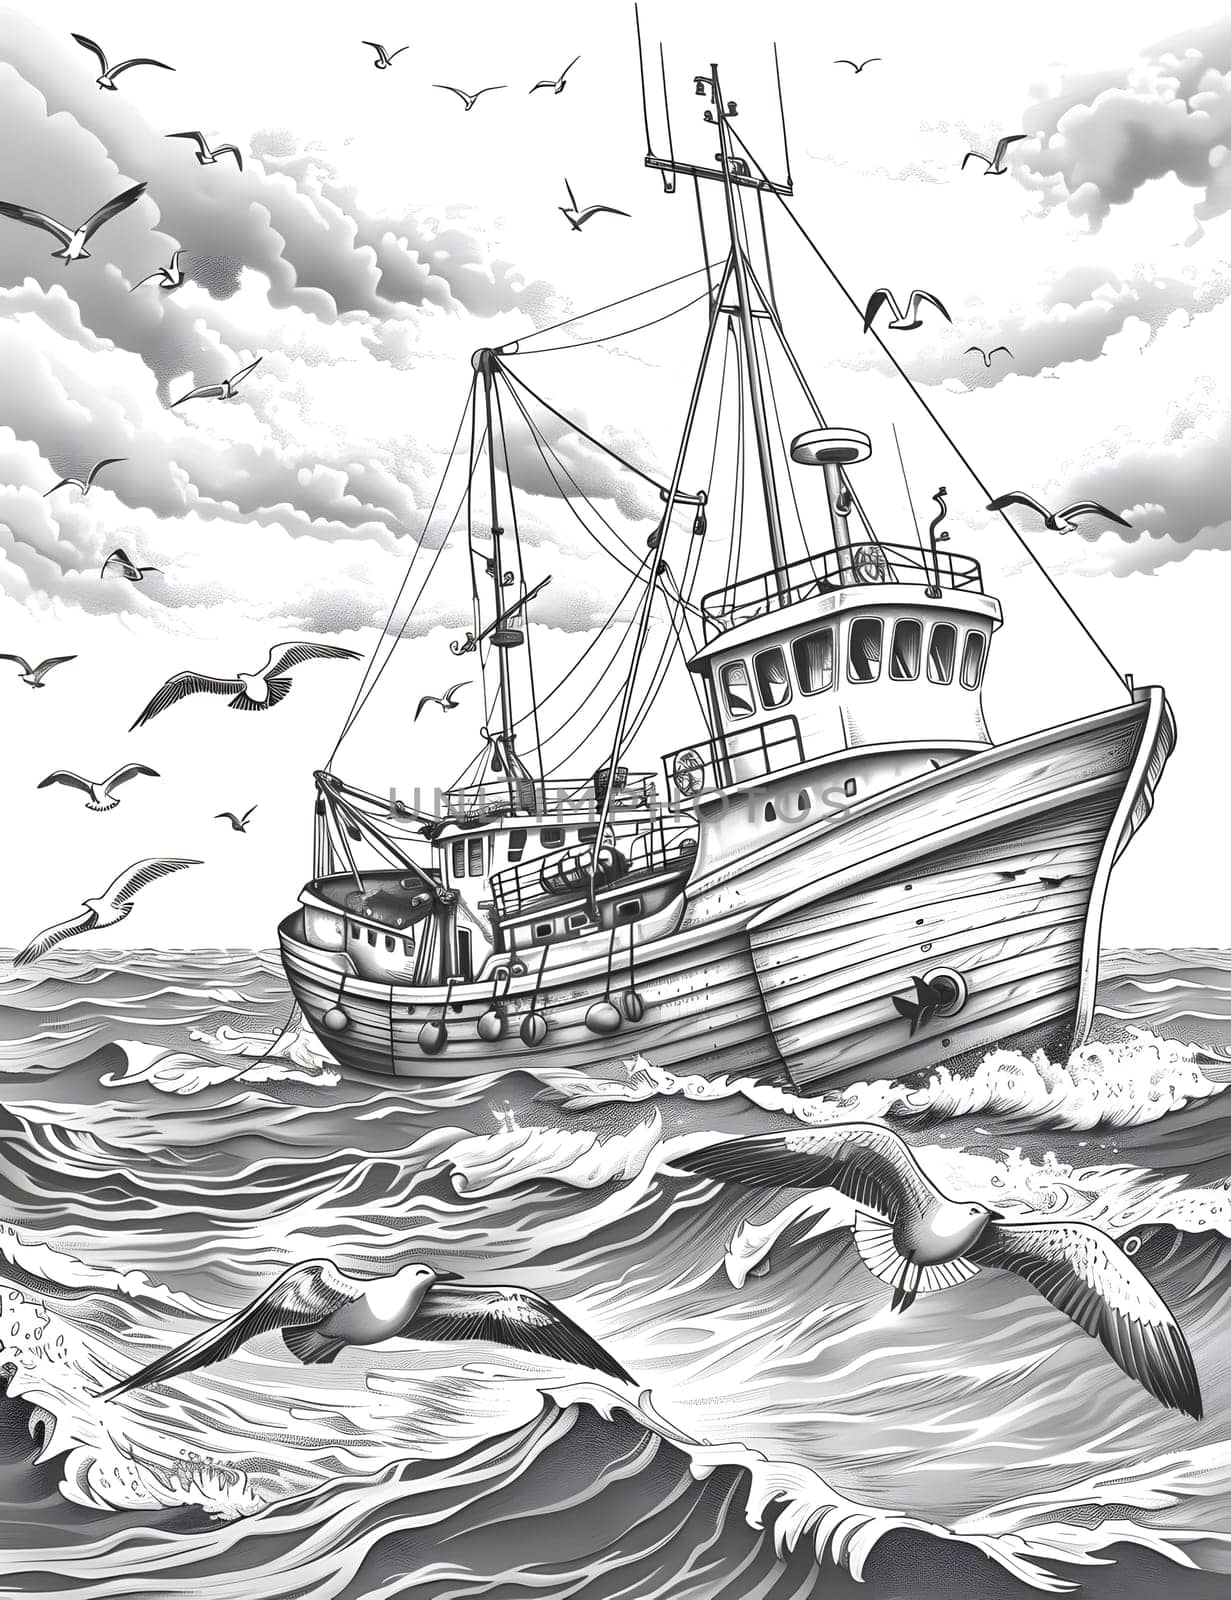 A boat sailing on the ocean with seagulls in a black and white drawing by Nadtochiy